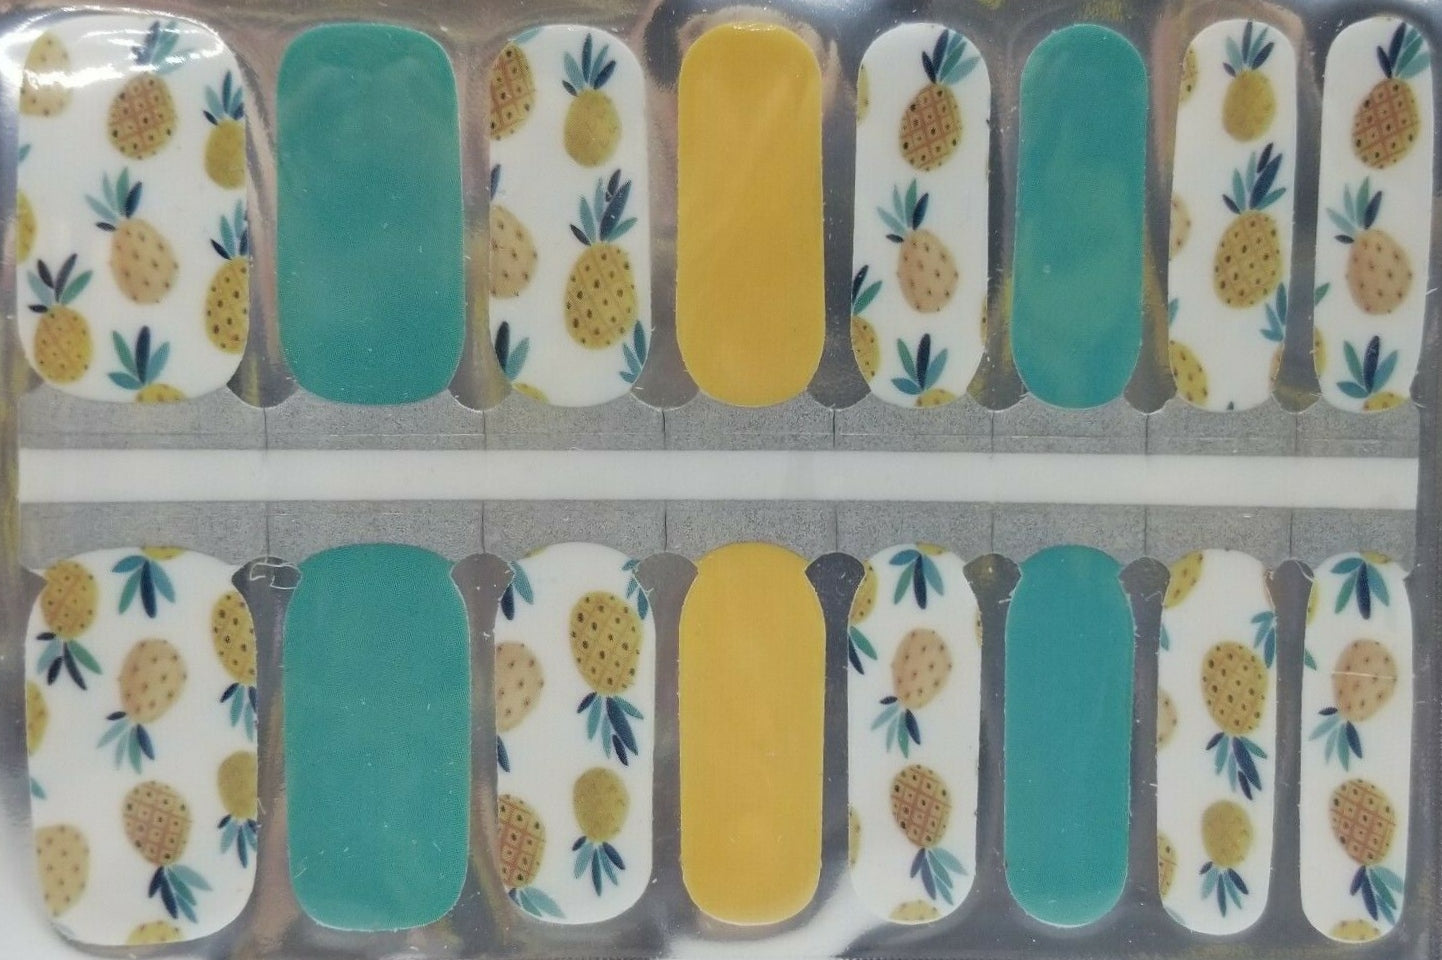 2. Tropical Pineapple Nail Stickers - wide 5